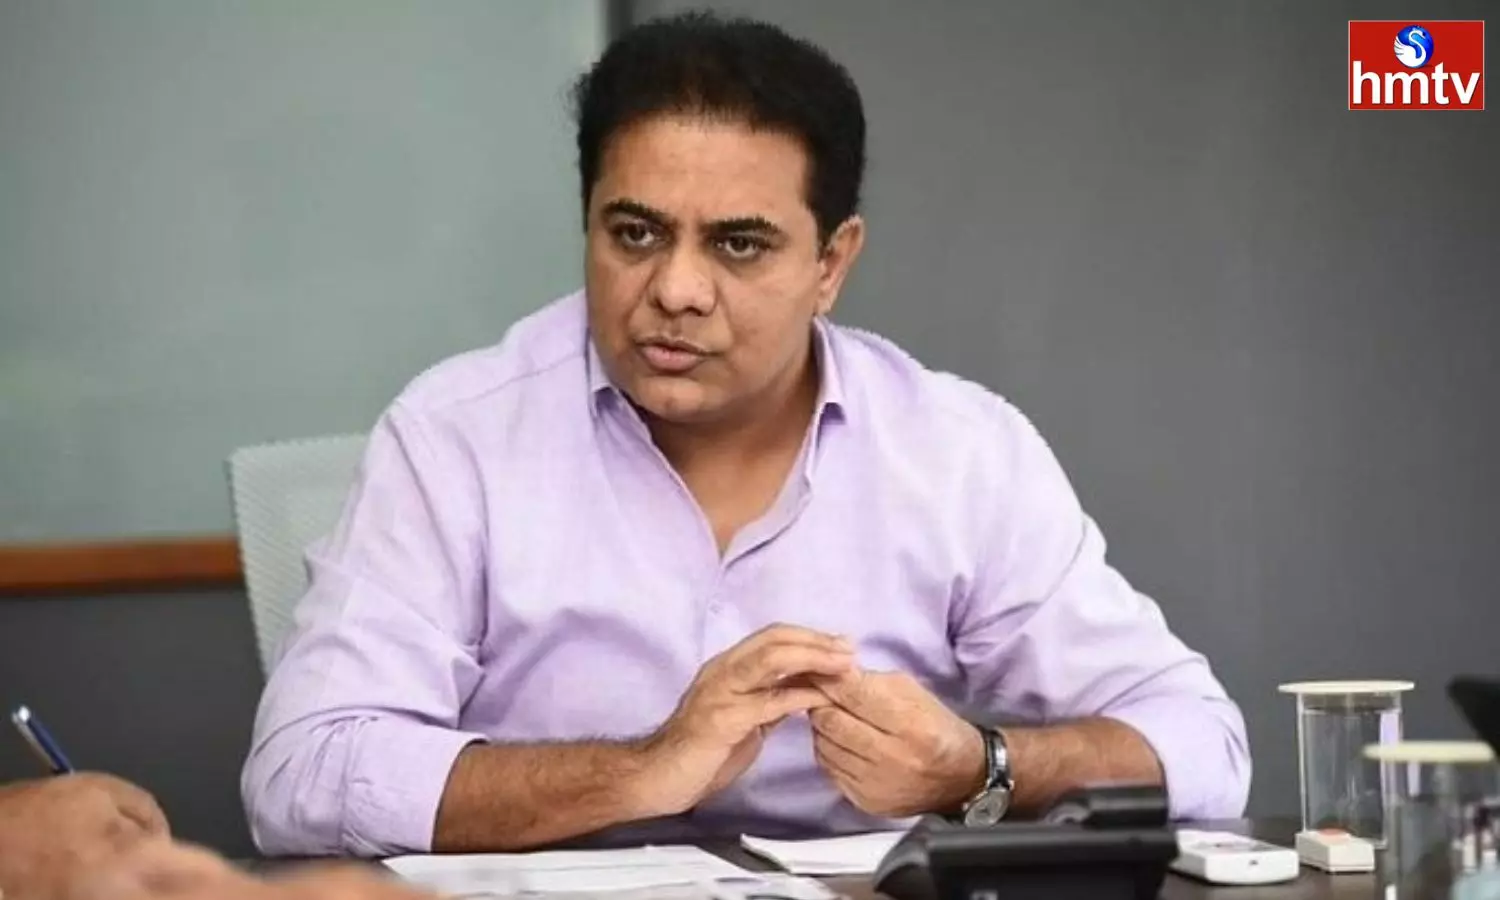 The key meeting chaired by KTR at Telangana Bhavan